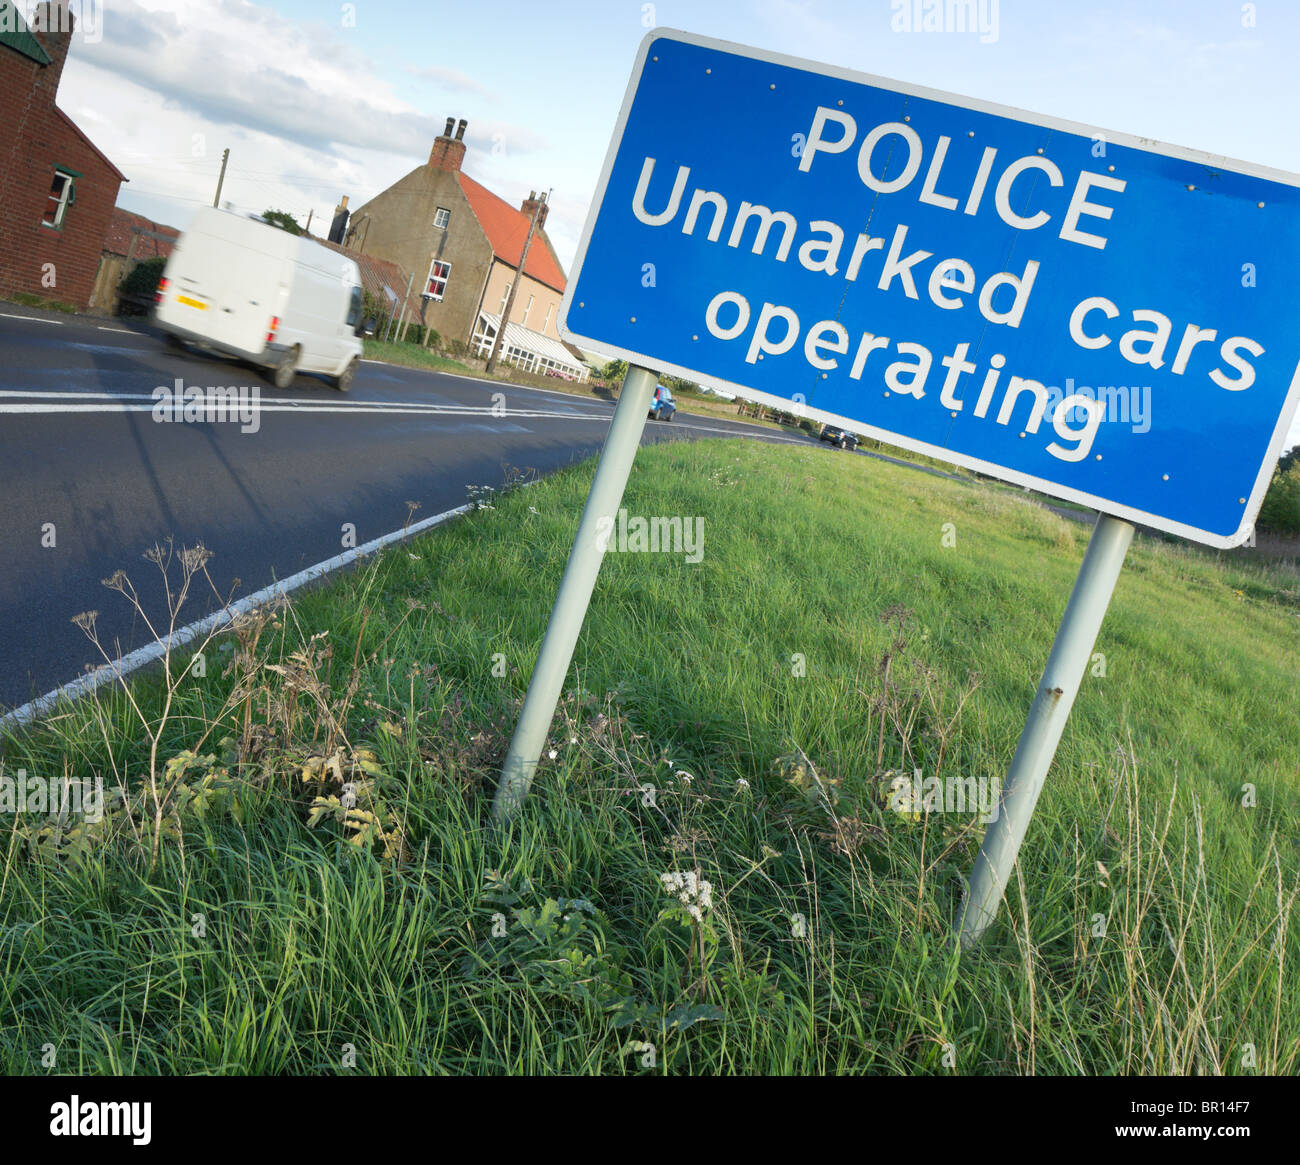 UK - unmarked police cars operating sign on a country road. White van passing. Stock Photo